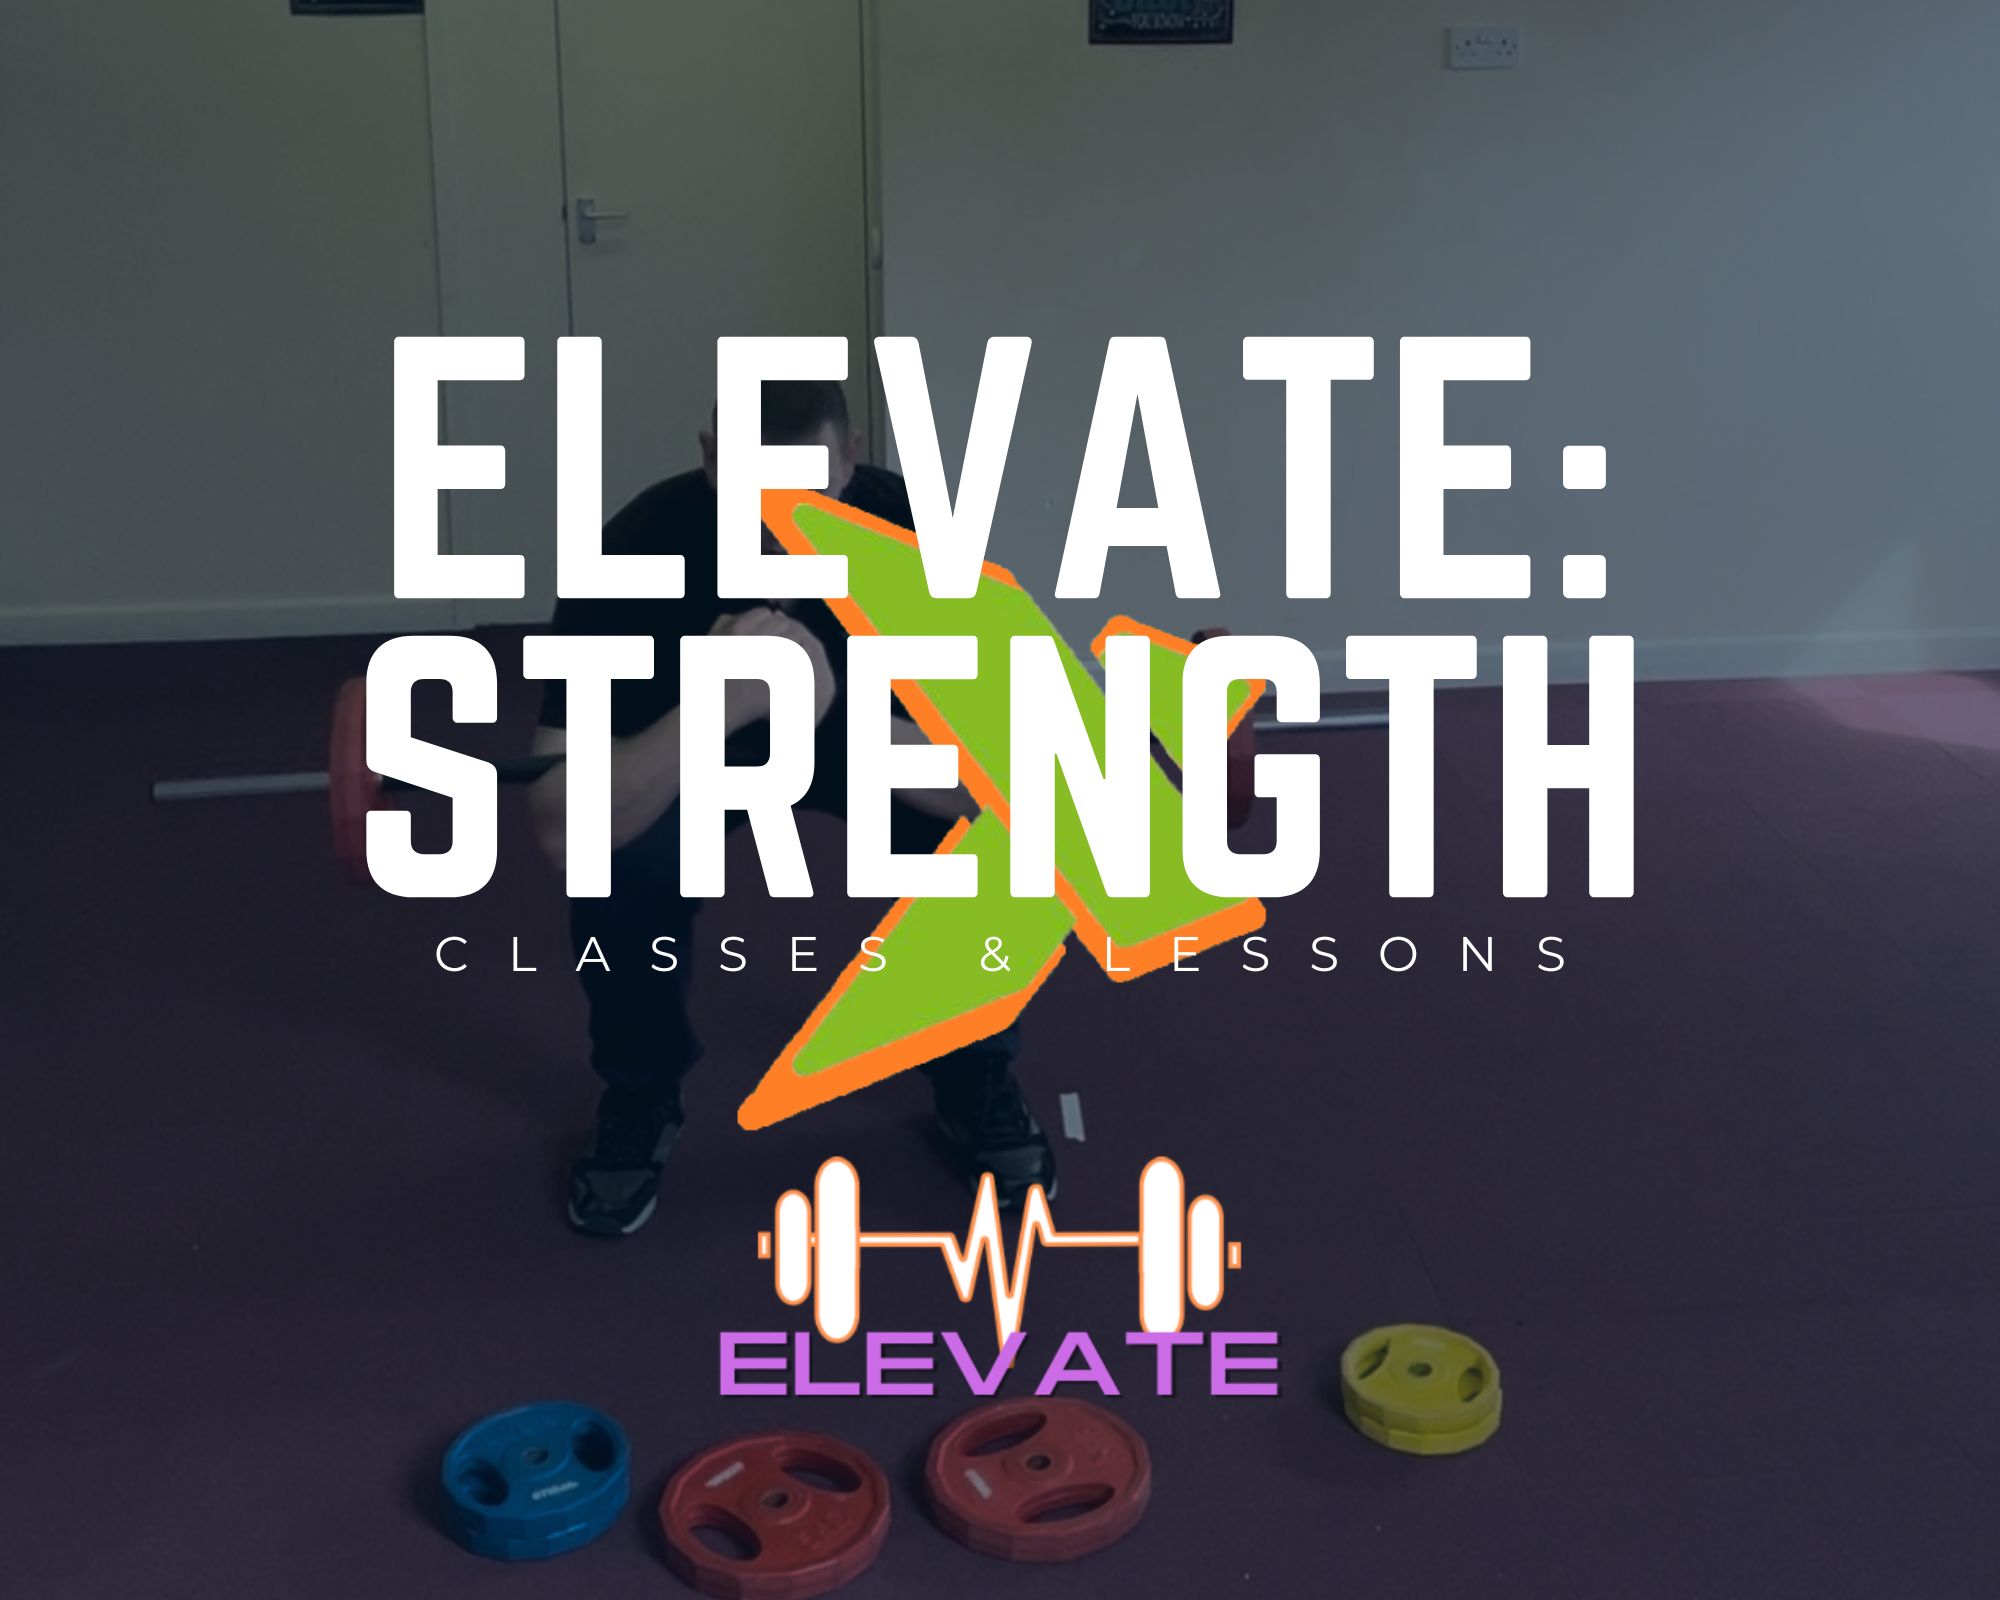 Elevate: Strength Lessons